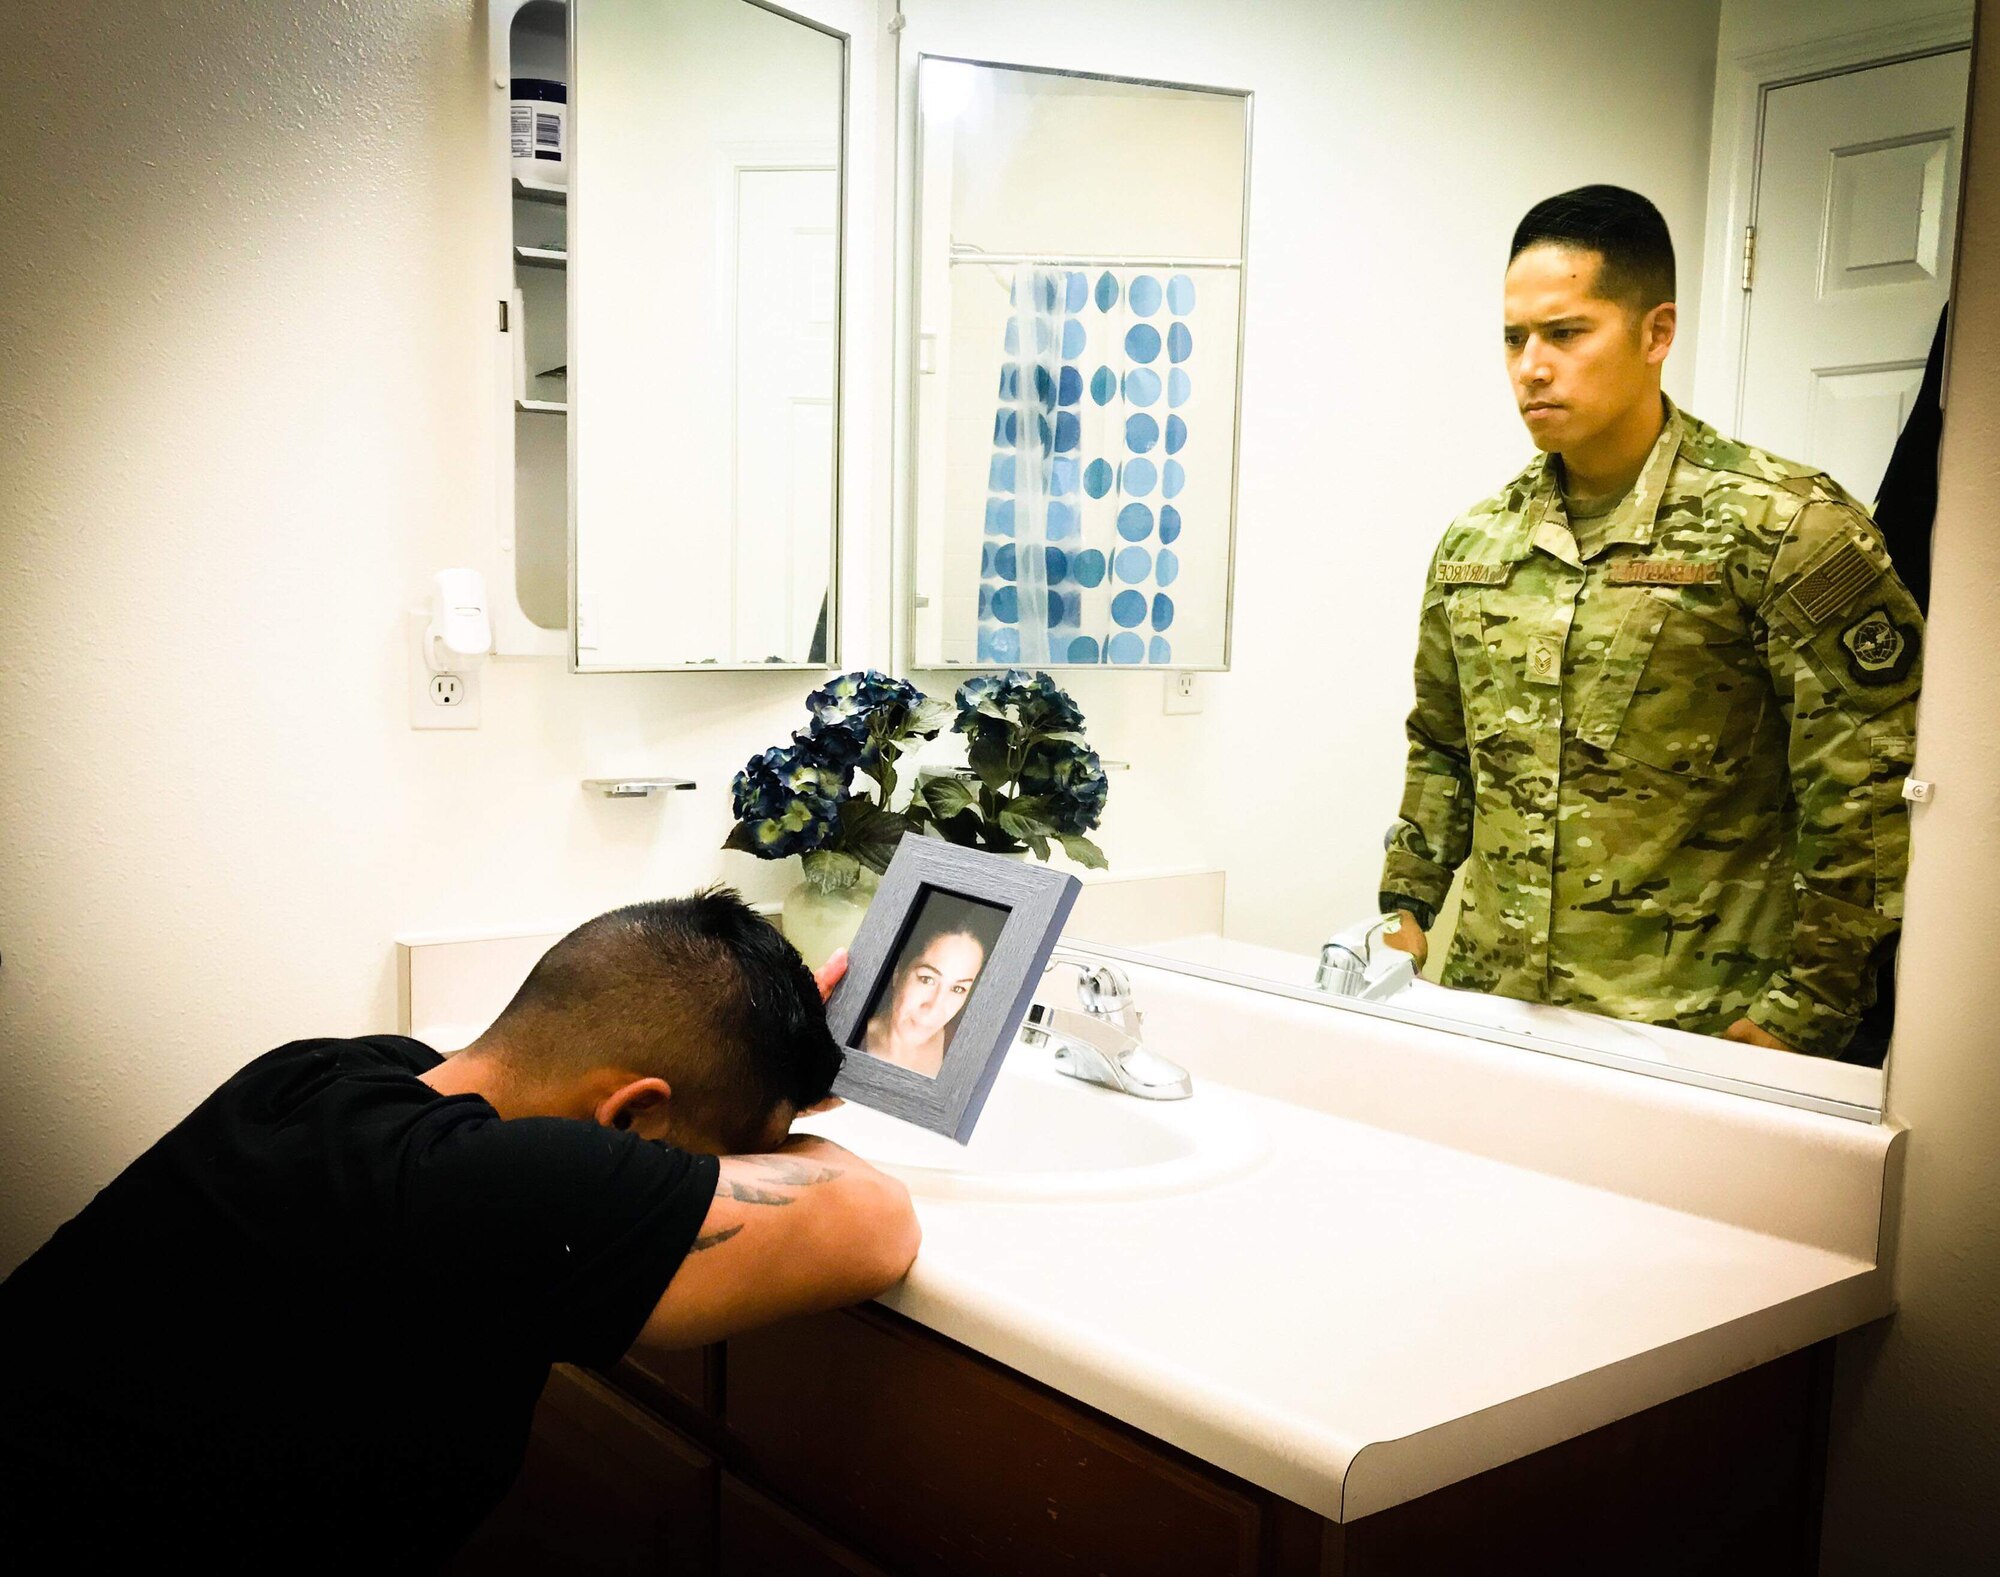 Master Sgt. Christofer Galbadores, 821st Contingency Response Support Squadron security forces training and logistics superintendent at Travis Air Force Base, California, mourns the loss of his mother. Losing his mother tested Galbadores’s faith and his perspective on life. “Physically and mentally, recovery was rough,” he said. “During that journey I lost sight of a few things, but I did learn that sometimes you really have to know darkness to appreciate the light.” (Courtesy Photo Illustration)